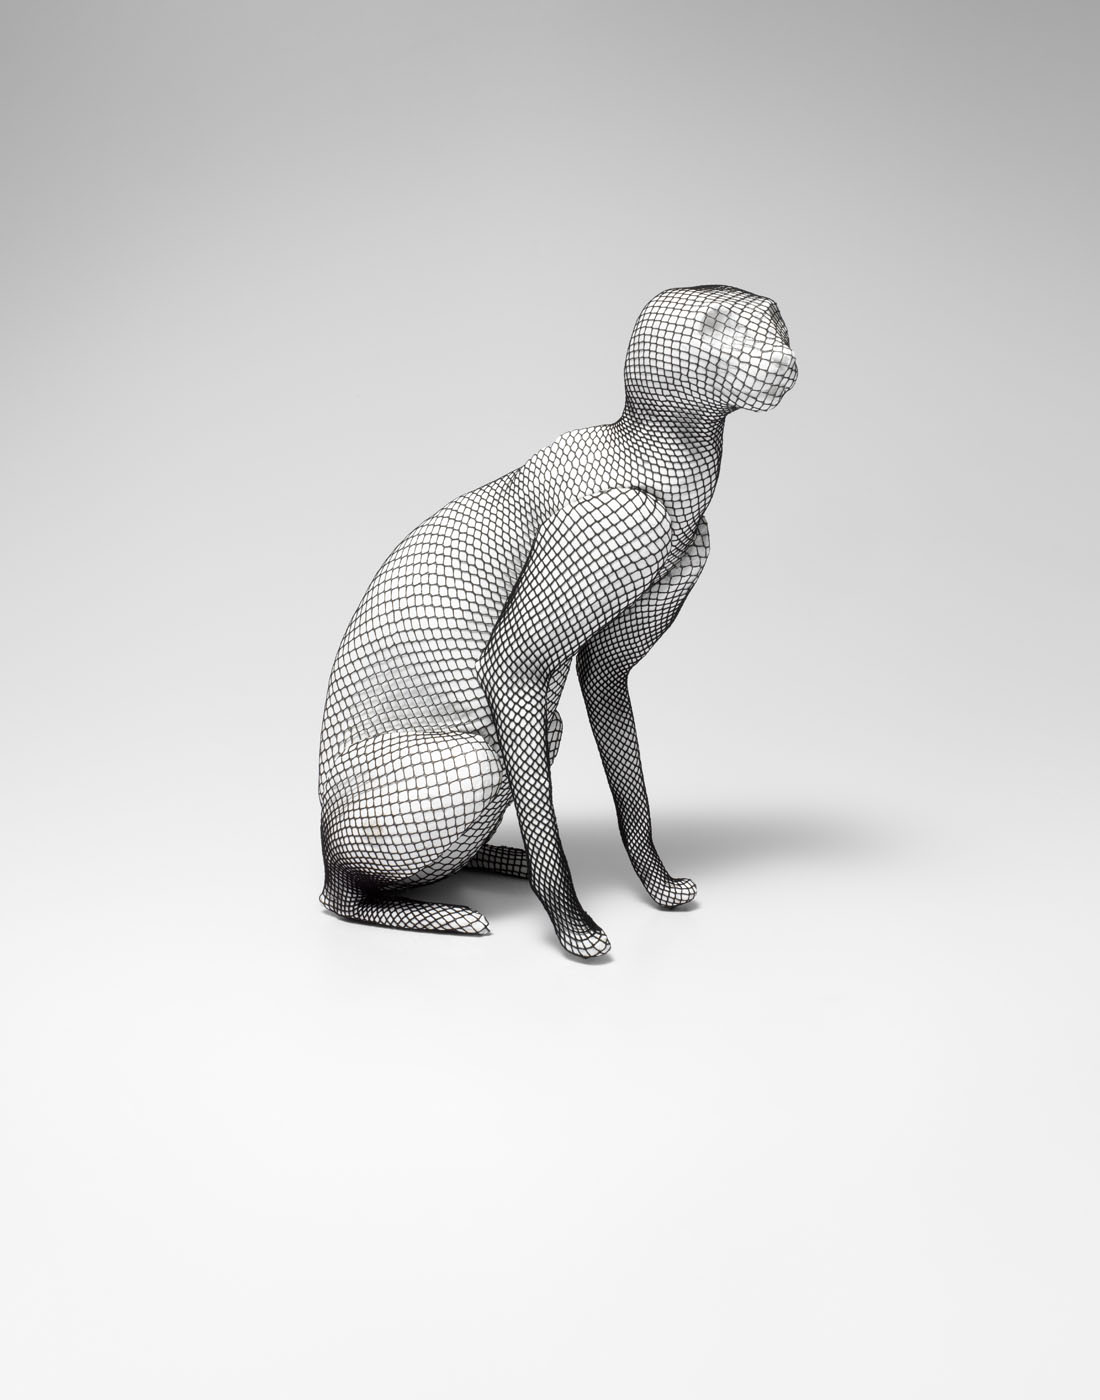 CGI image of cat using fishnet tights  by Alexander Kent London based still life and product photographer.